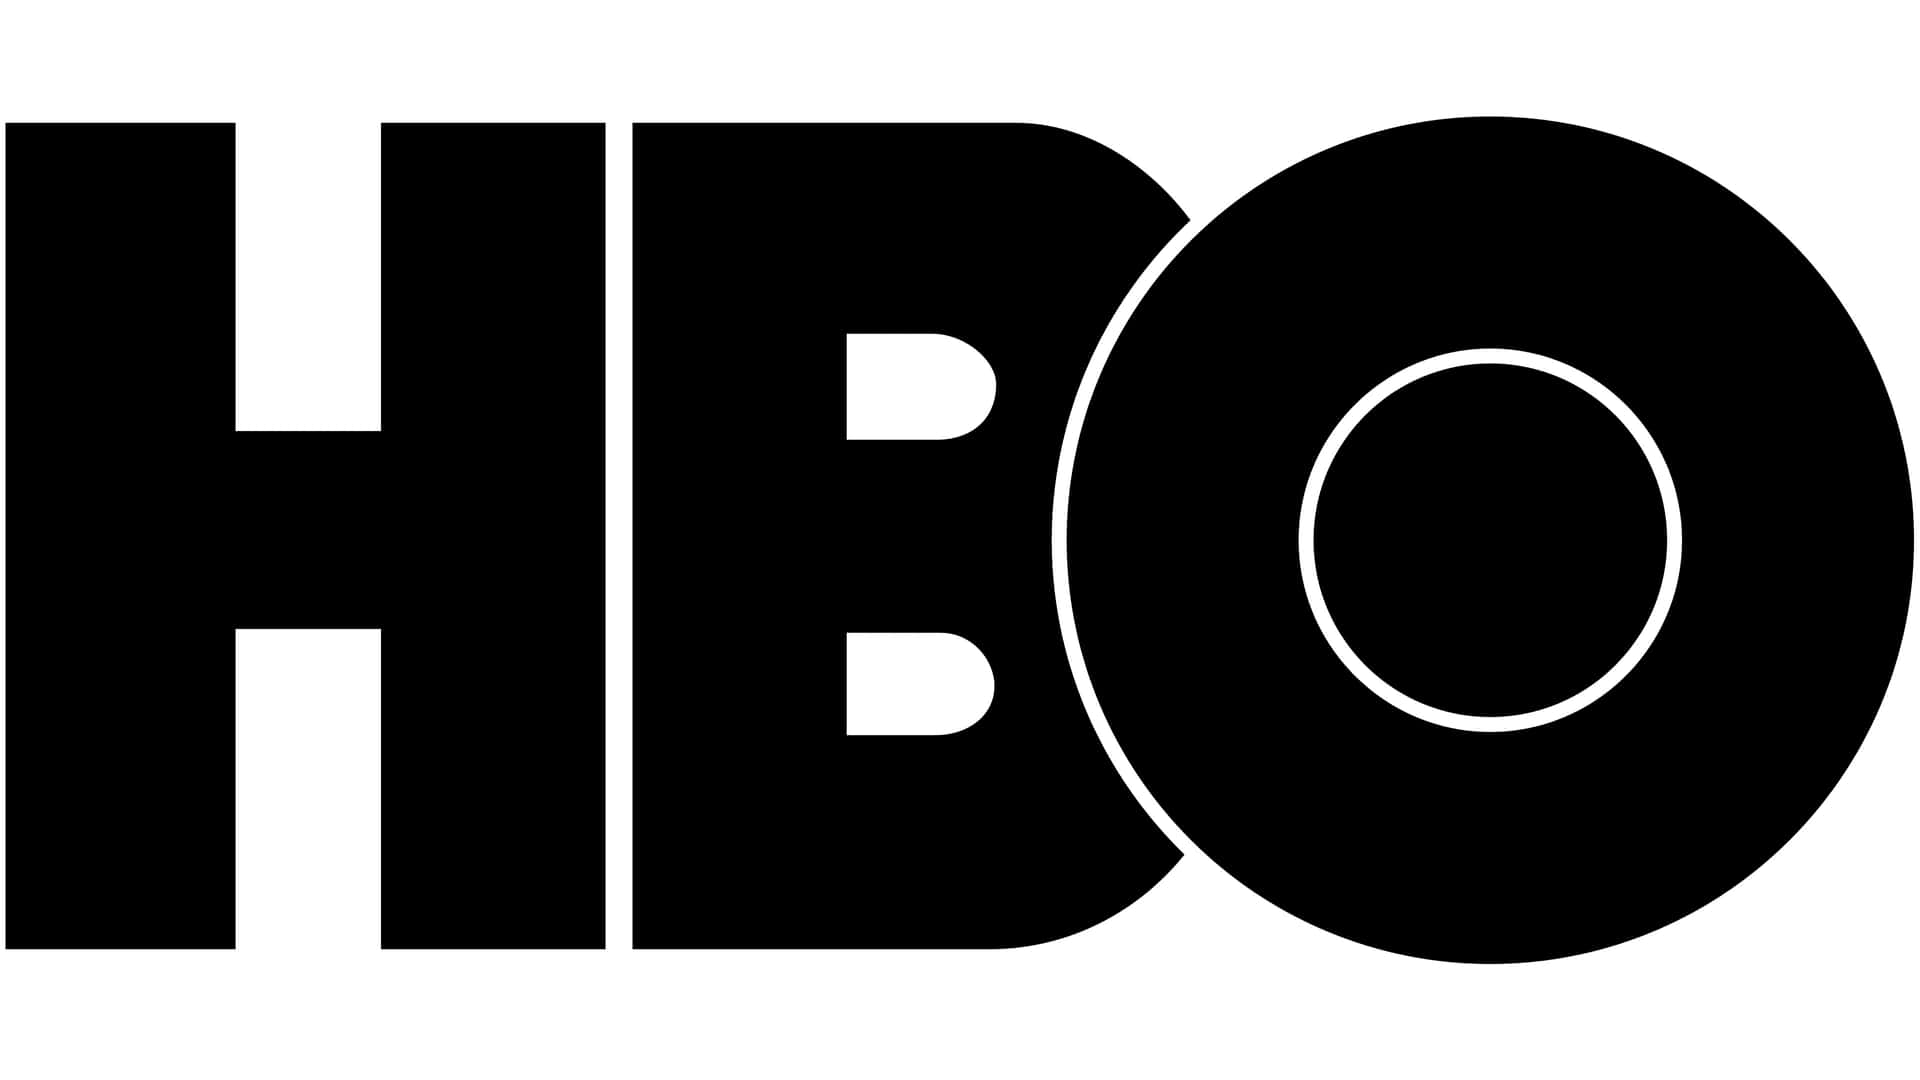 Get ready for new and exciting HBO shows!